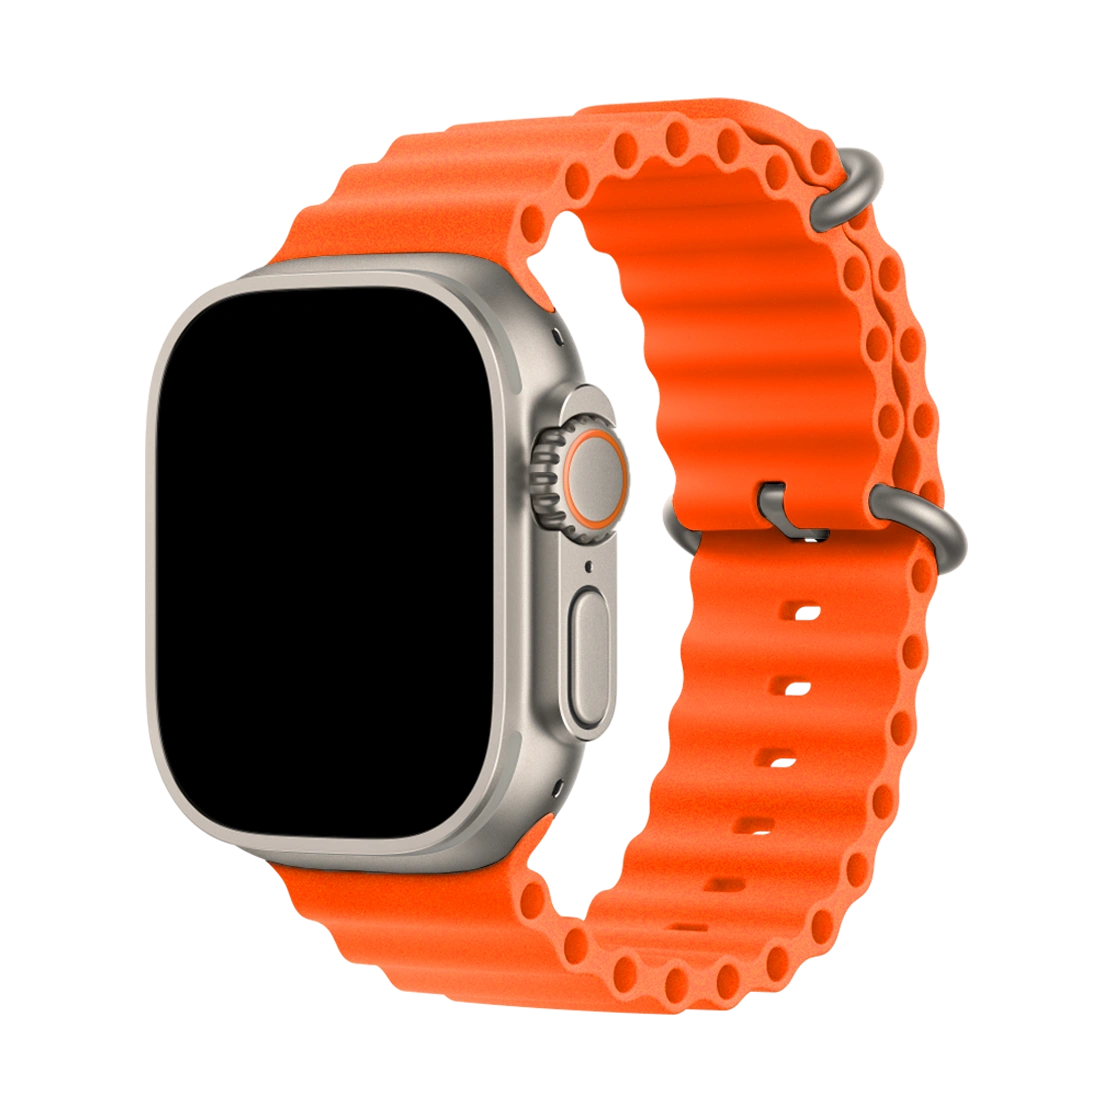  Apple Watch Series 8 Midnight Aluminum Case with Nike Midnight Sport Band